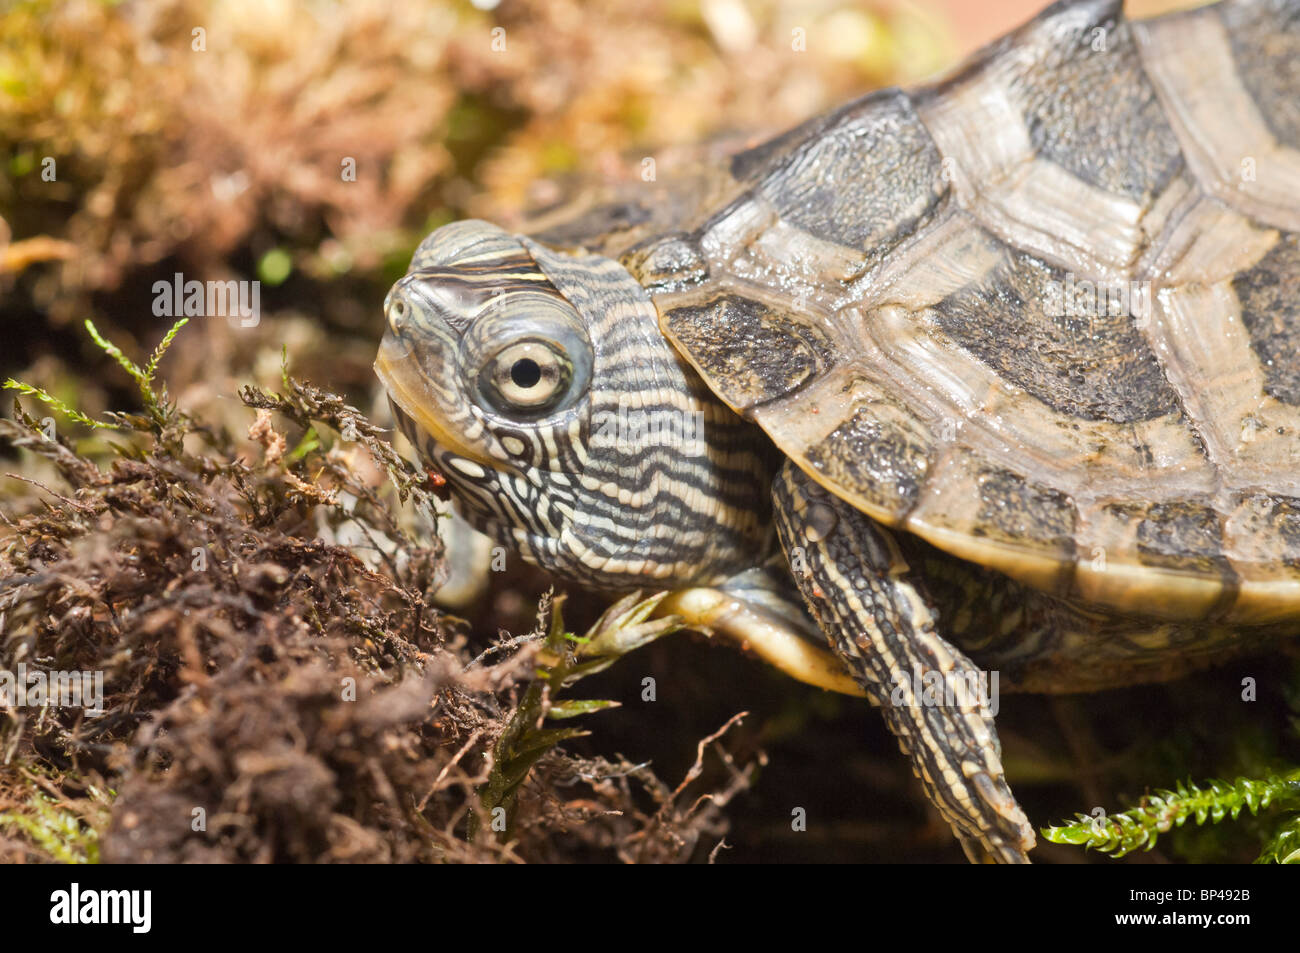 Common (northern) map turtle, Graptemys geographica, native to eastern and central United States and Canada Stock Photo